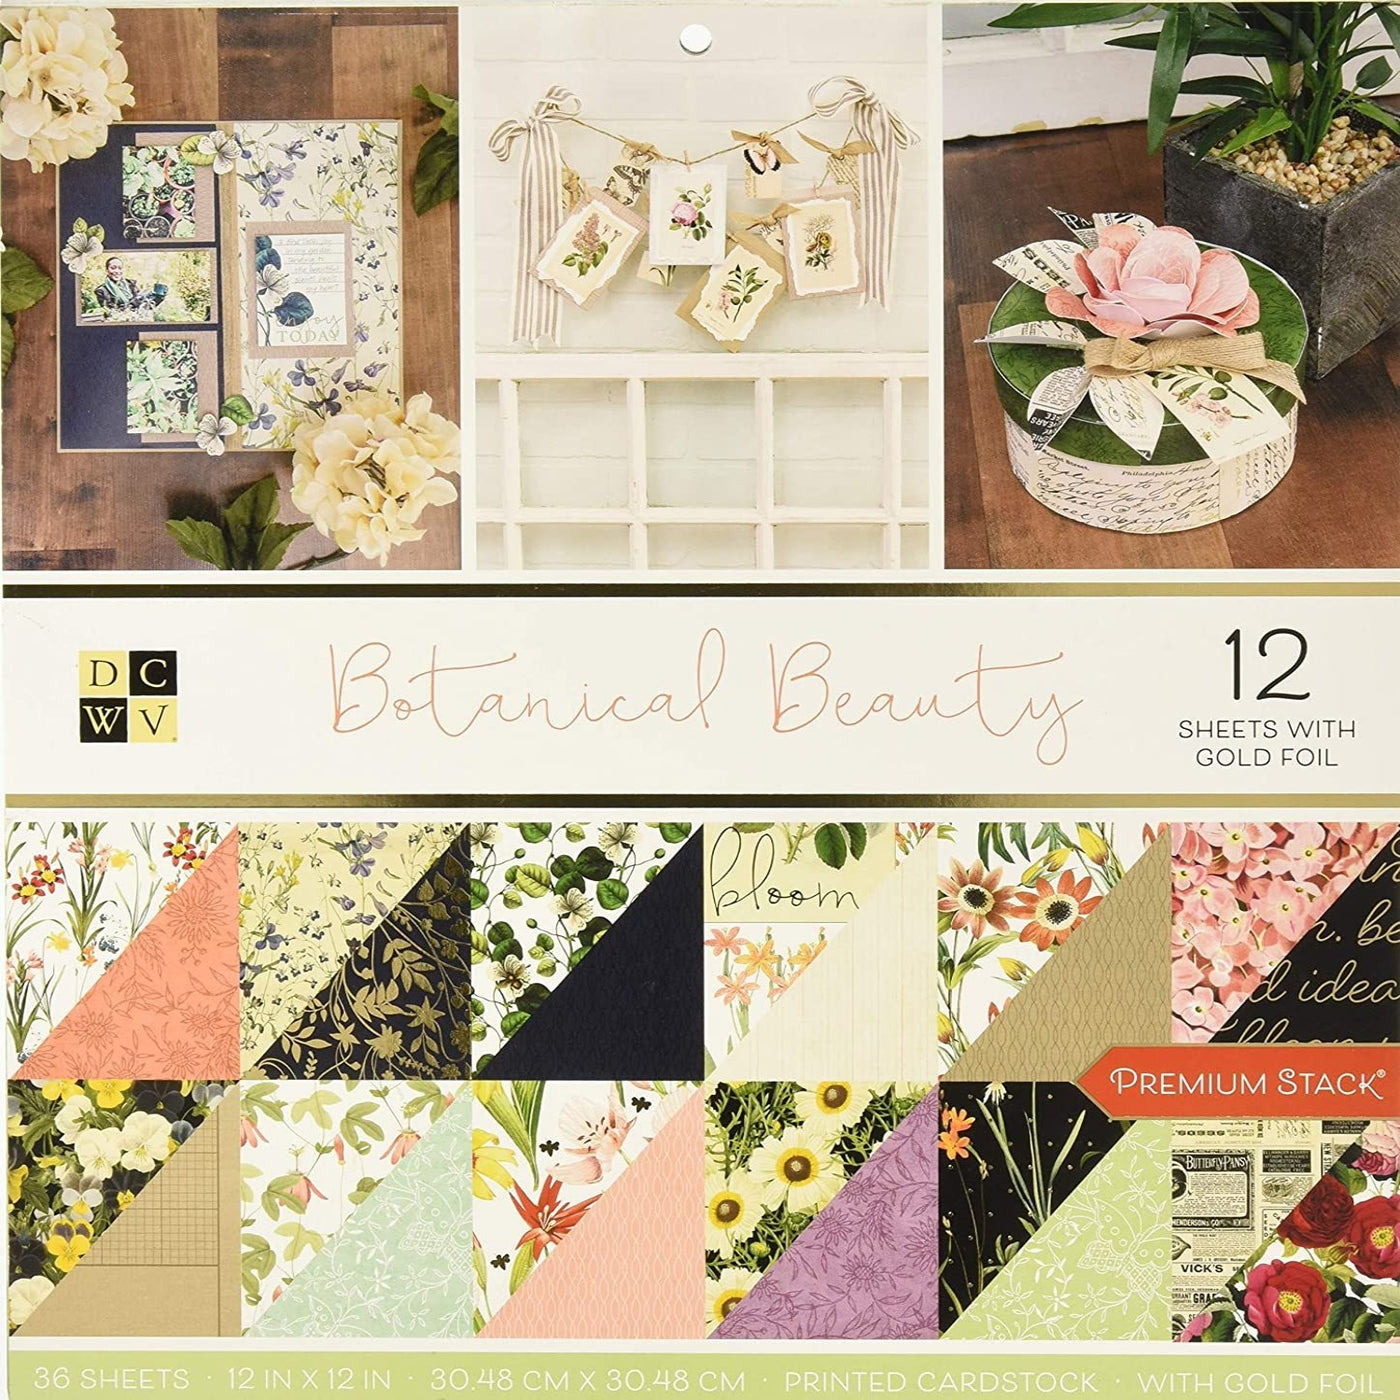 Botanical Beauty Premium Stack from Die Cuts with a View - 36 sheets, 12 with gold foil